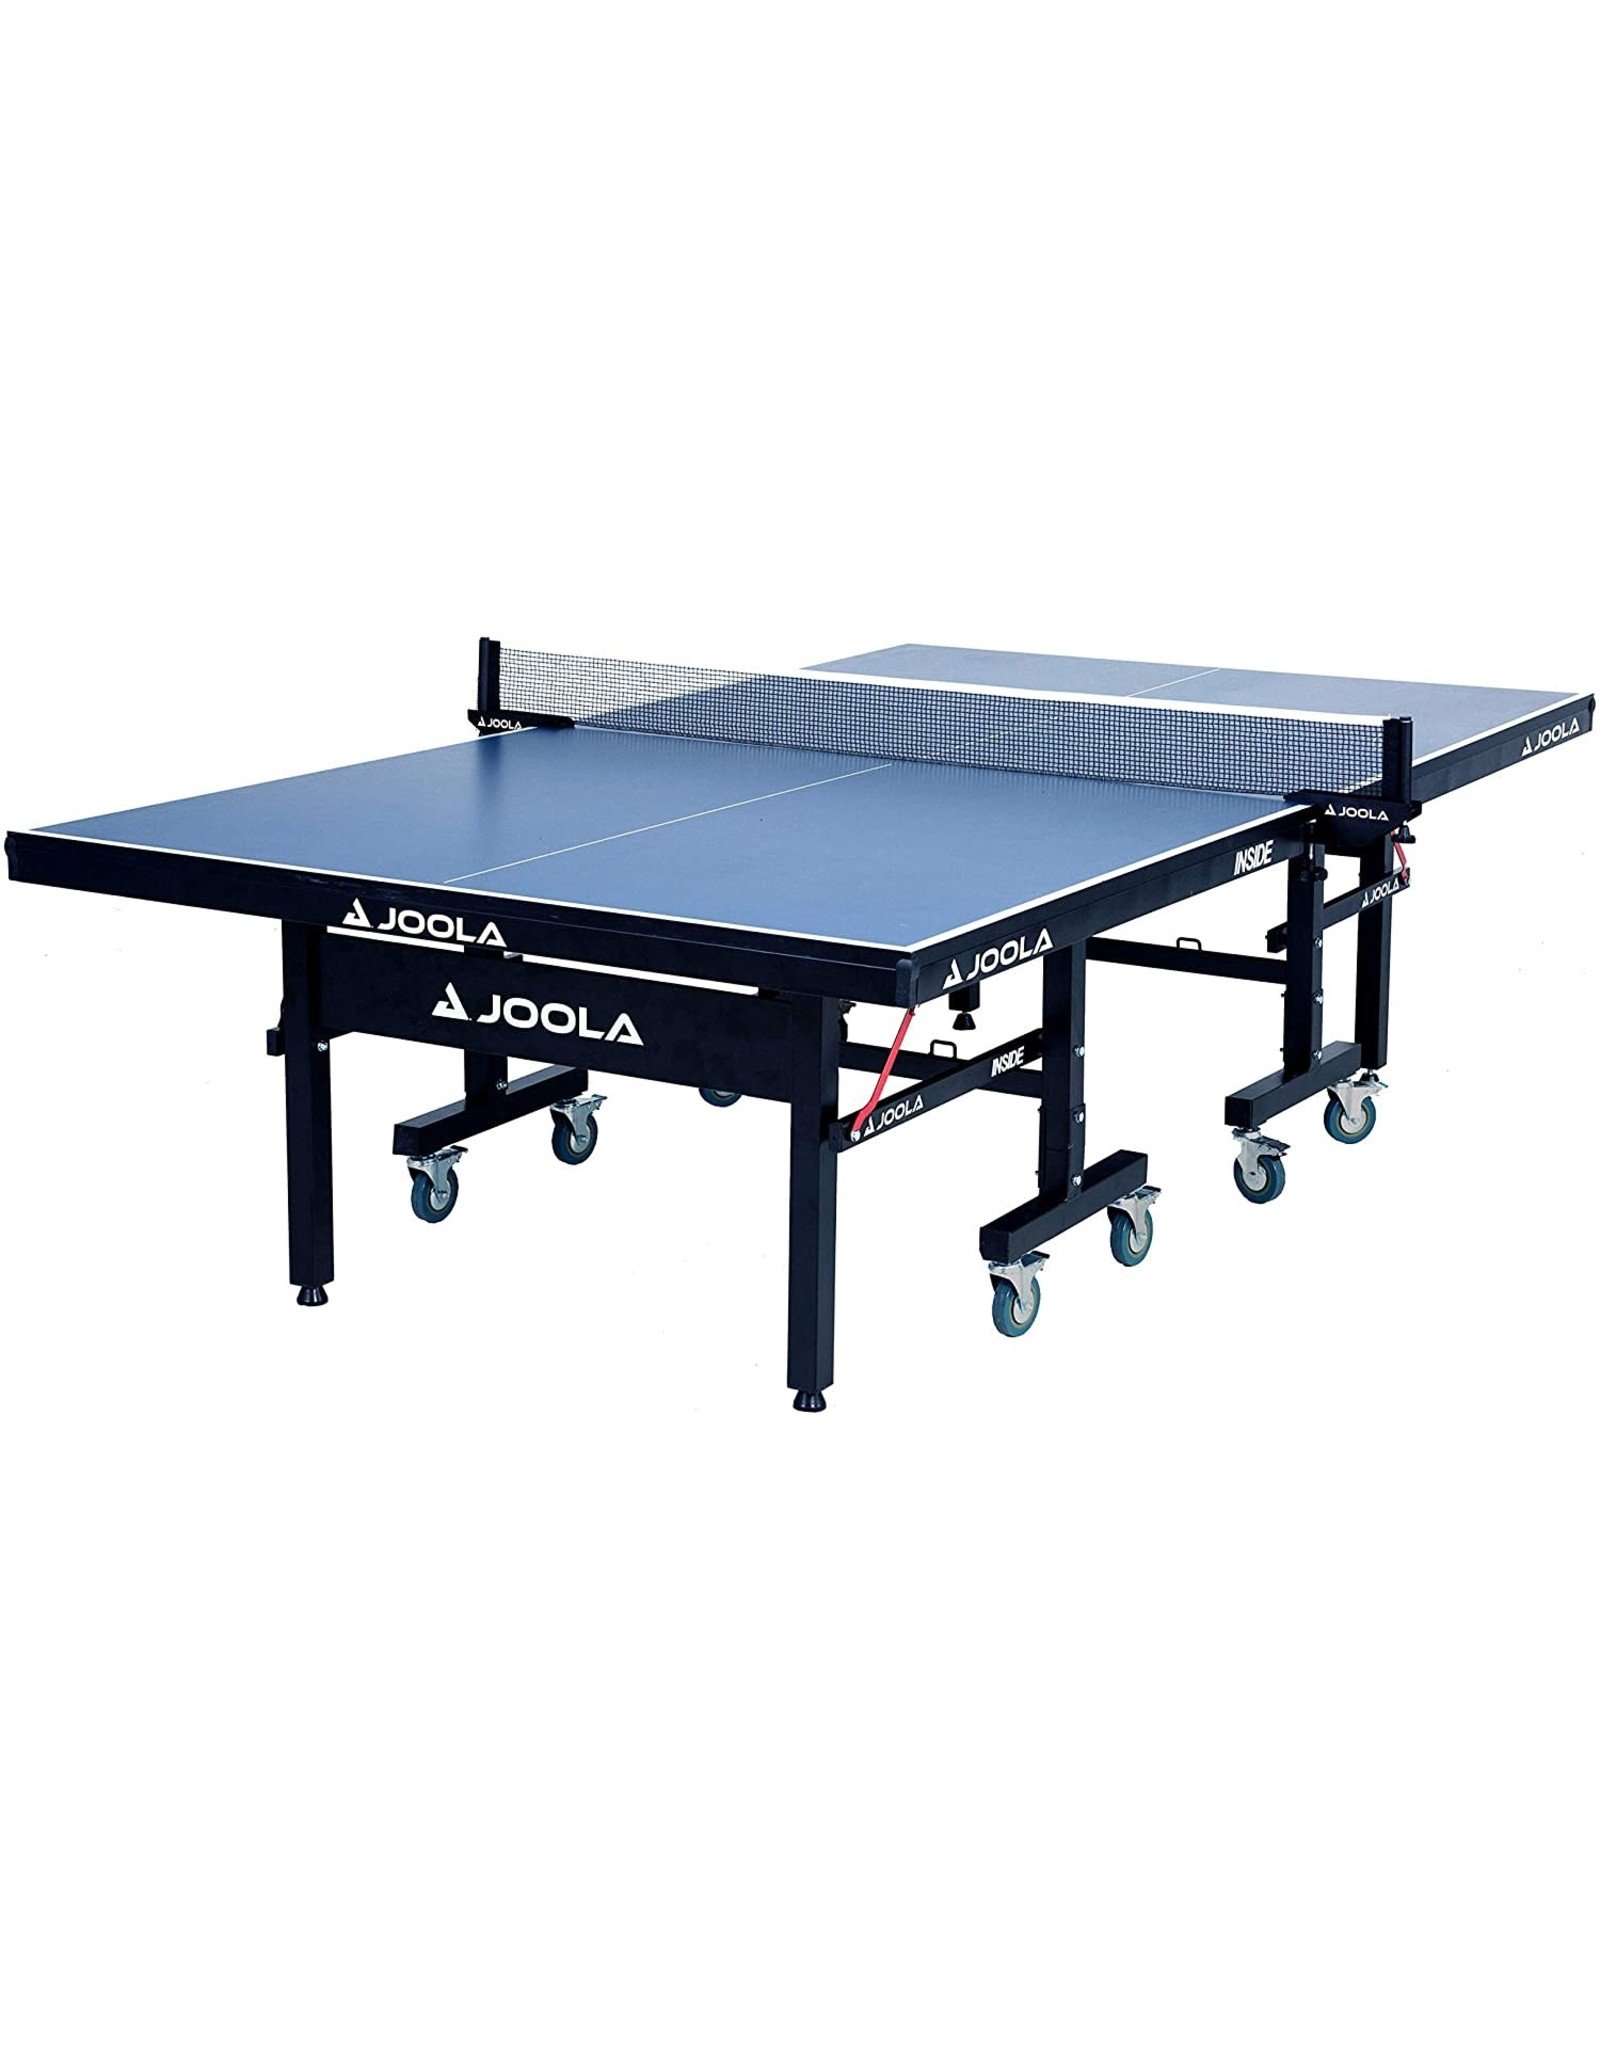 JOOLA Inside 25mm Table Tennis Table with Net Set Features 10-Min Assembly,  Playback Mode, Compact Storage Amazing Bargains USA Buffalo, NY